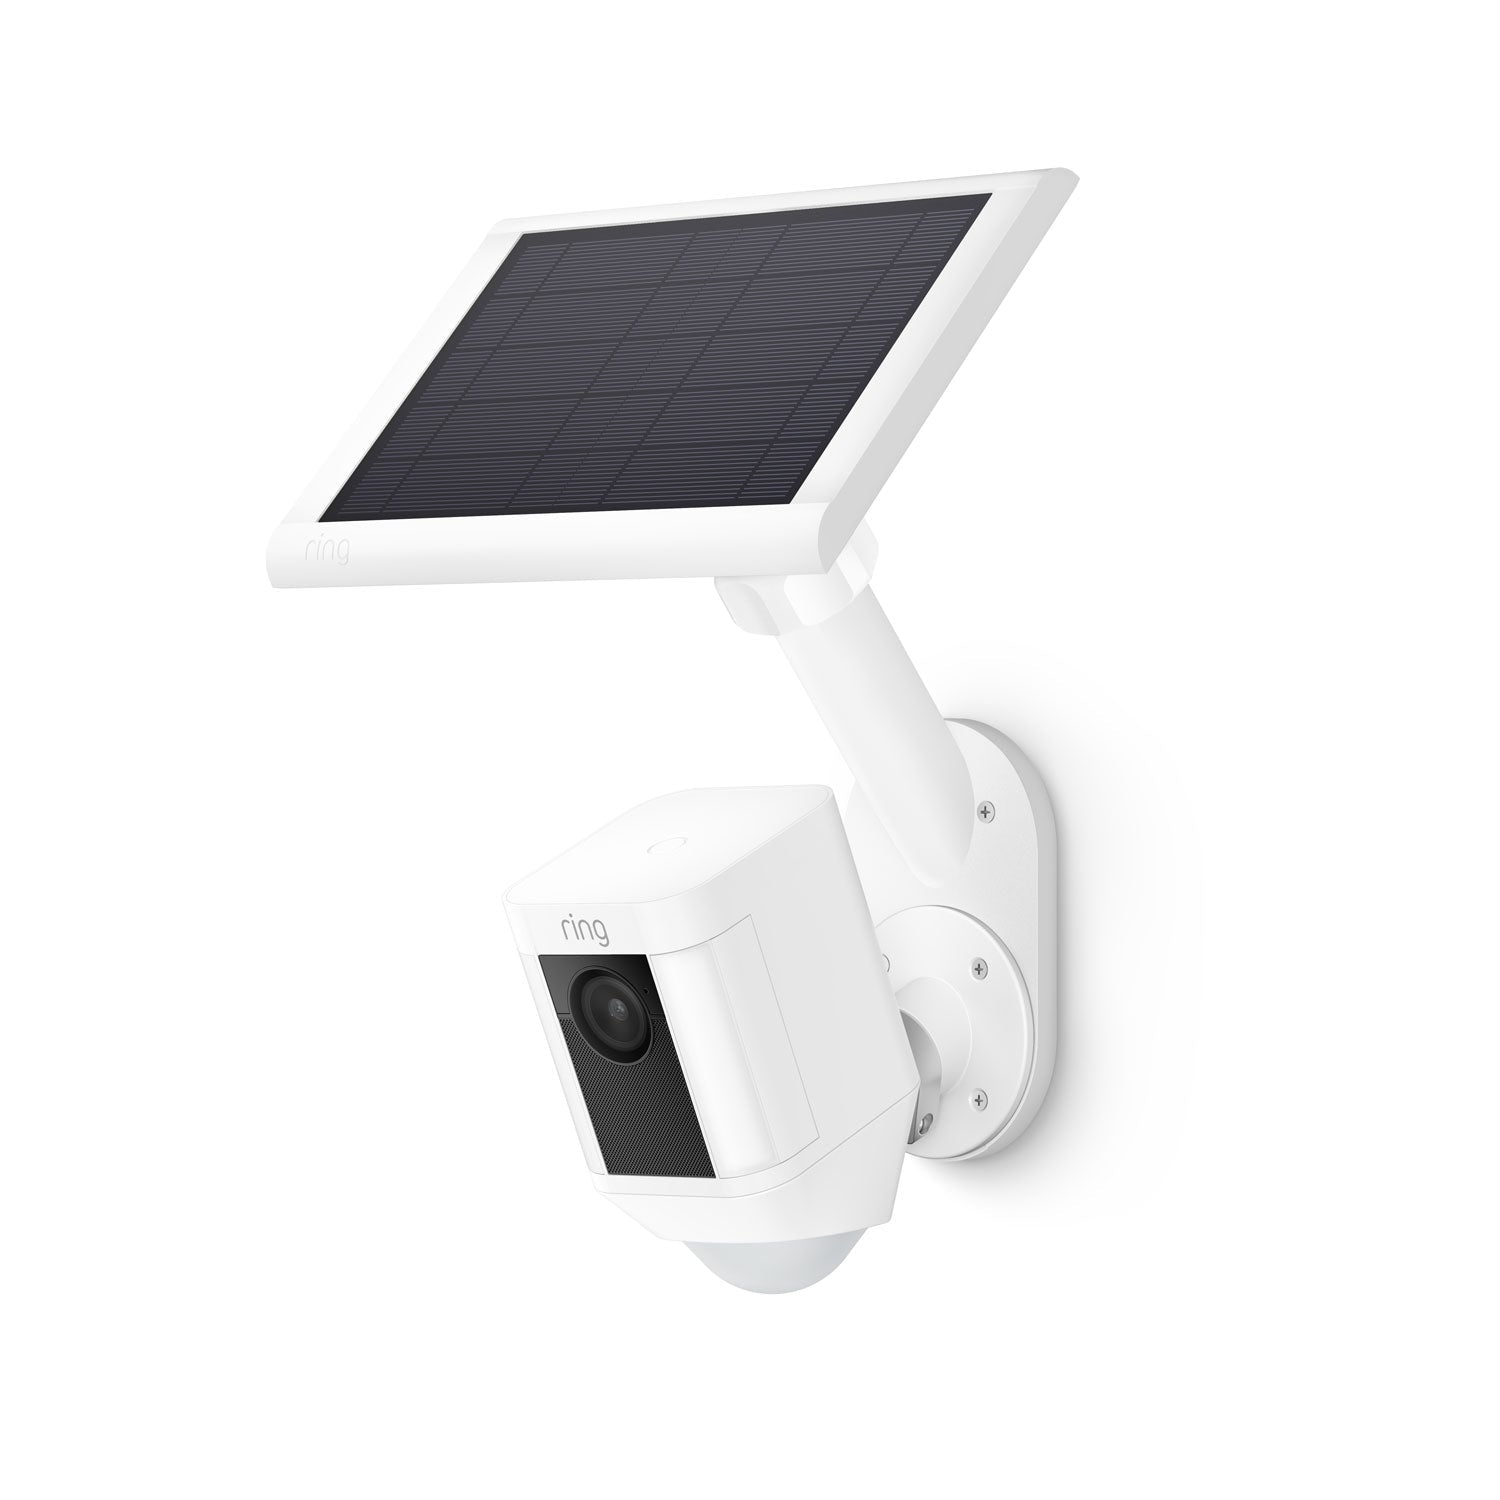 Wall Mount for Solar Panels and Cams - White